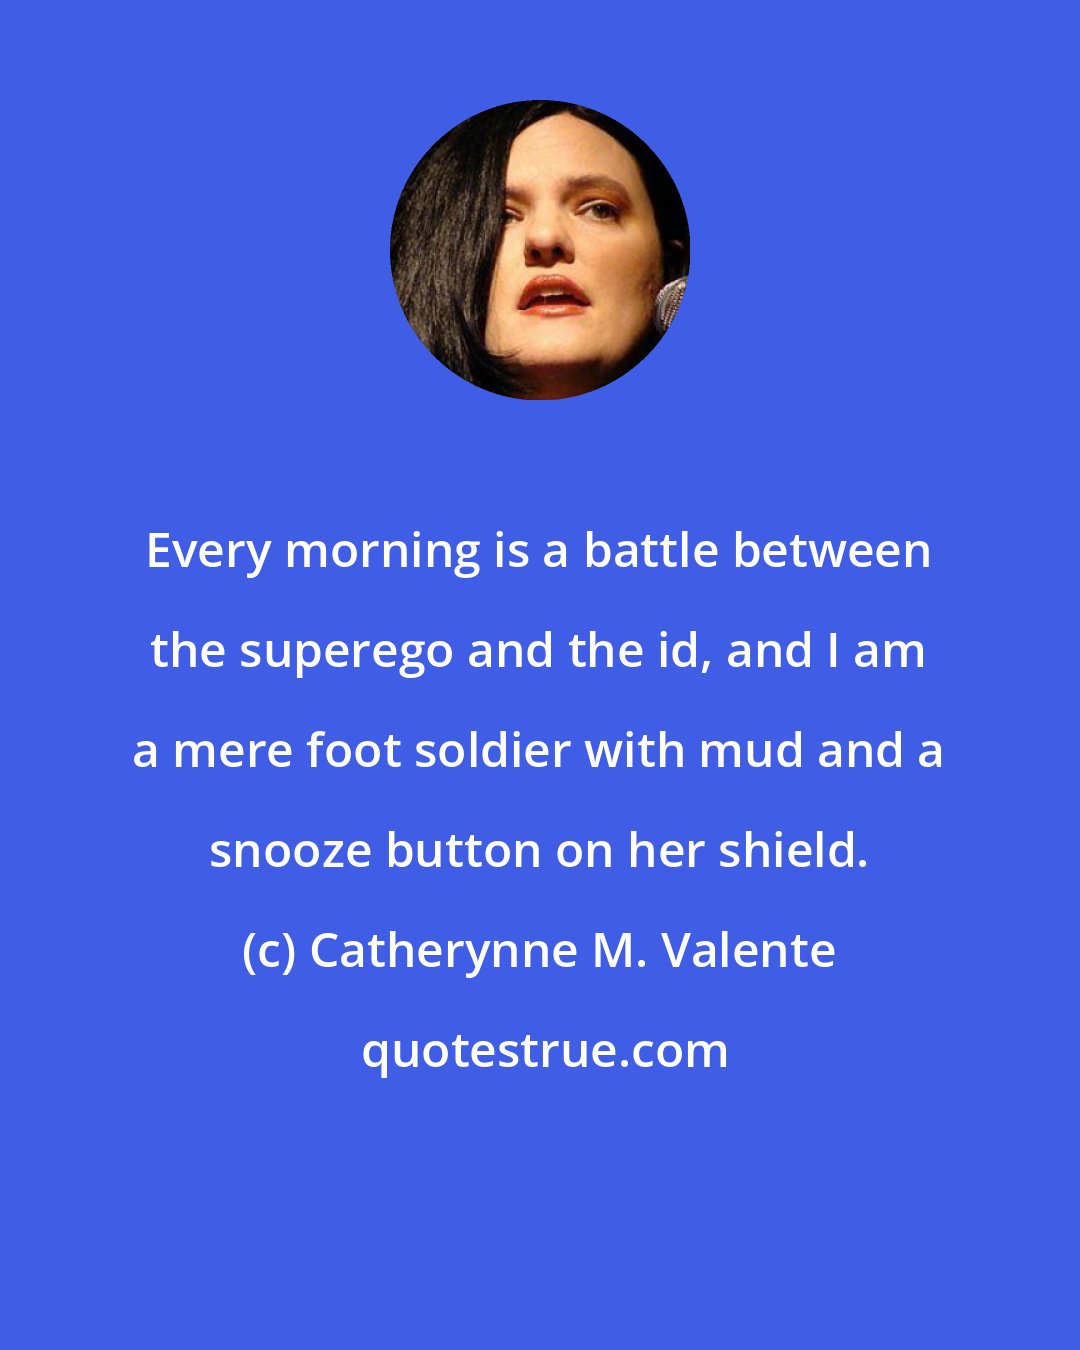 Catherynne M. Valente: Every morning is a battle between the superego and the id, and I am a mere foot soldier with mud and a snooze button on her shield.